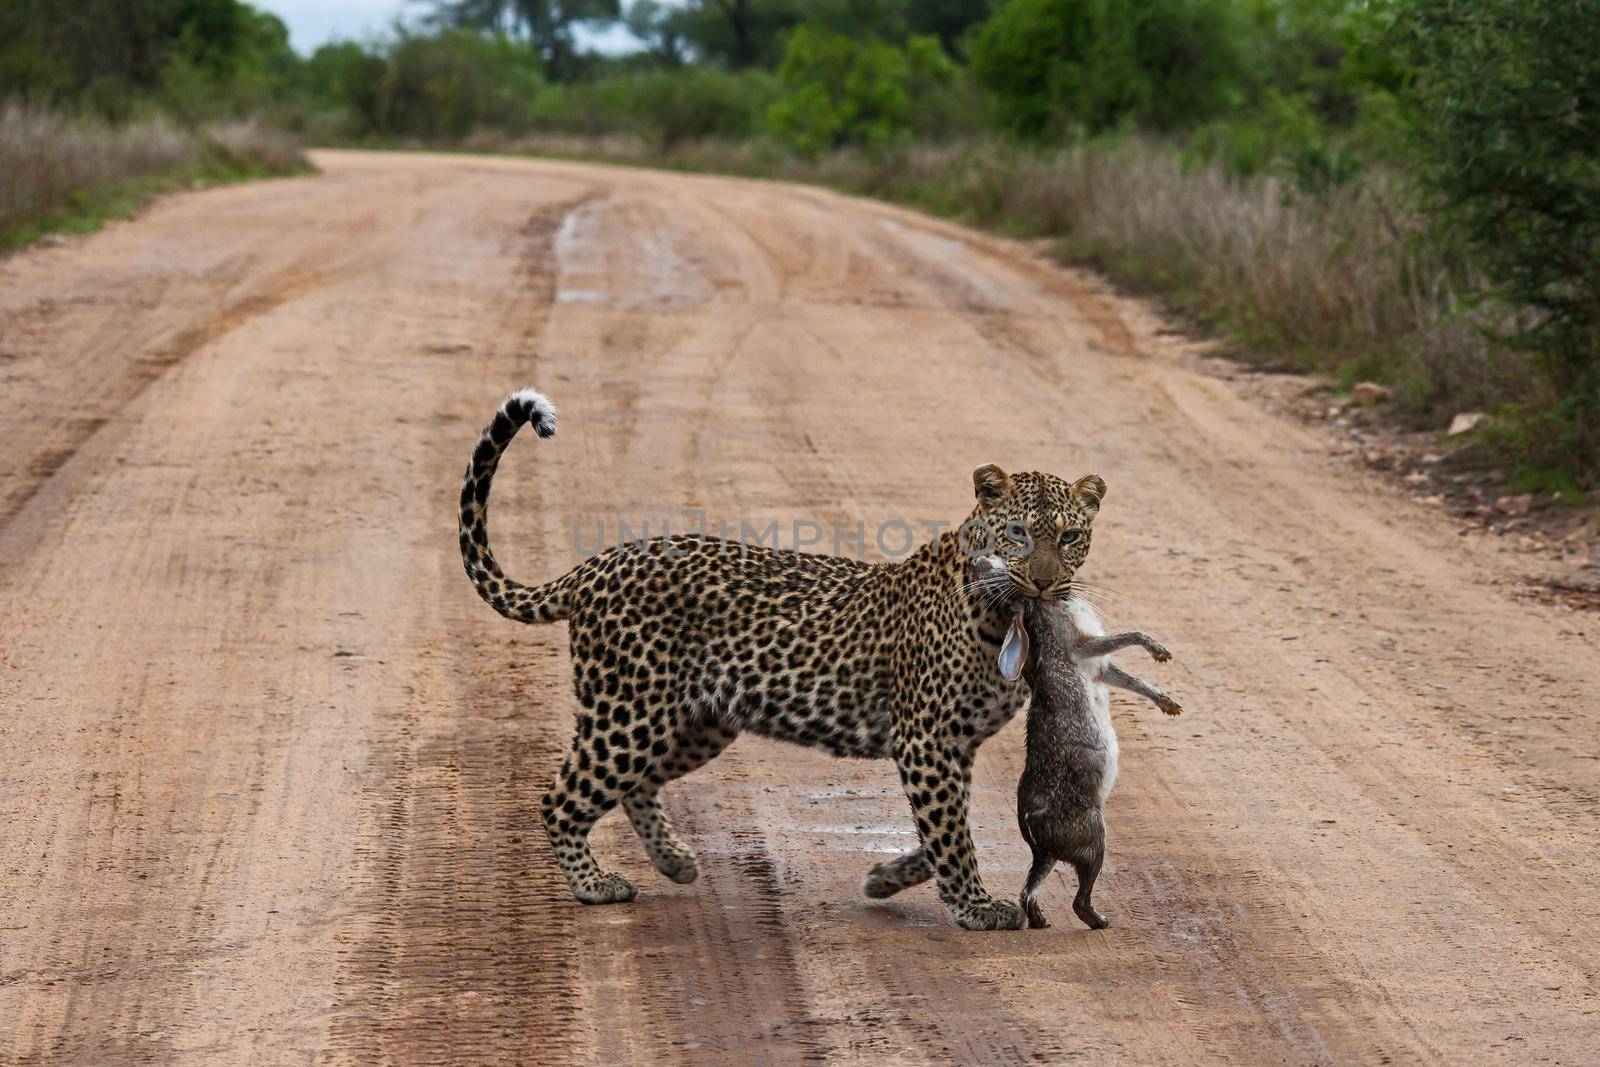 Young female Leopard (Panthera pardus) with her Scrub Hare (Lepus saxatilis) prey crossing a road in Kruger National Park South Africa